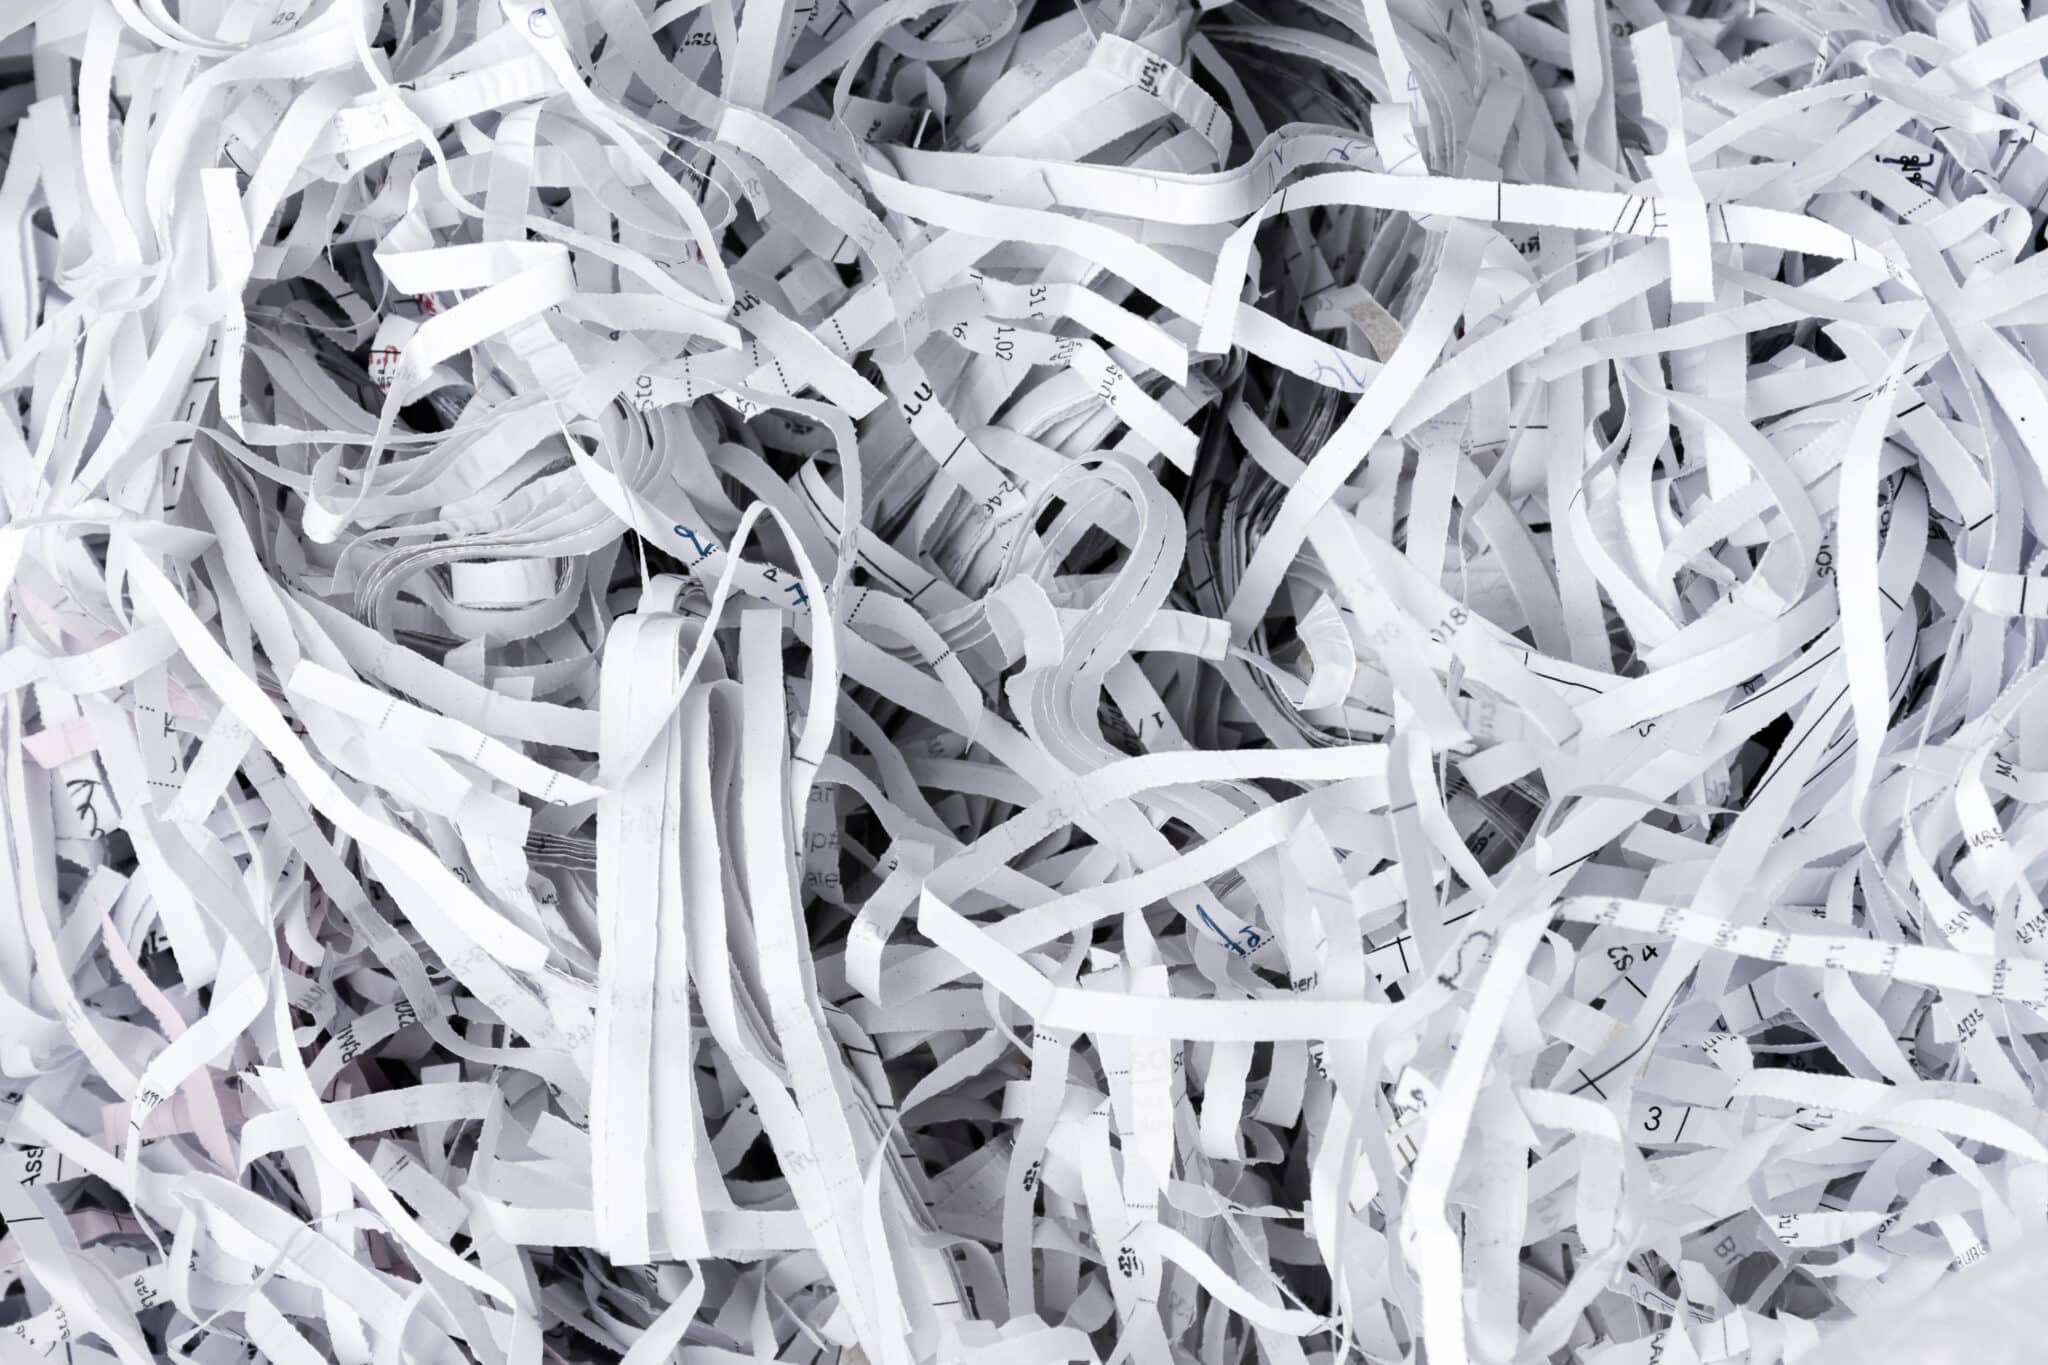 Do You Own a Paper Shredder? If Not, You Should.